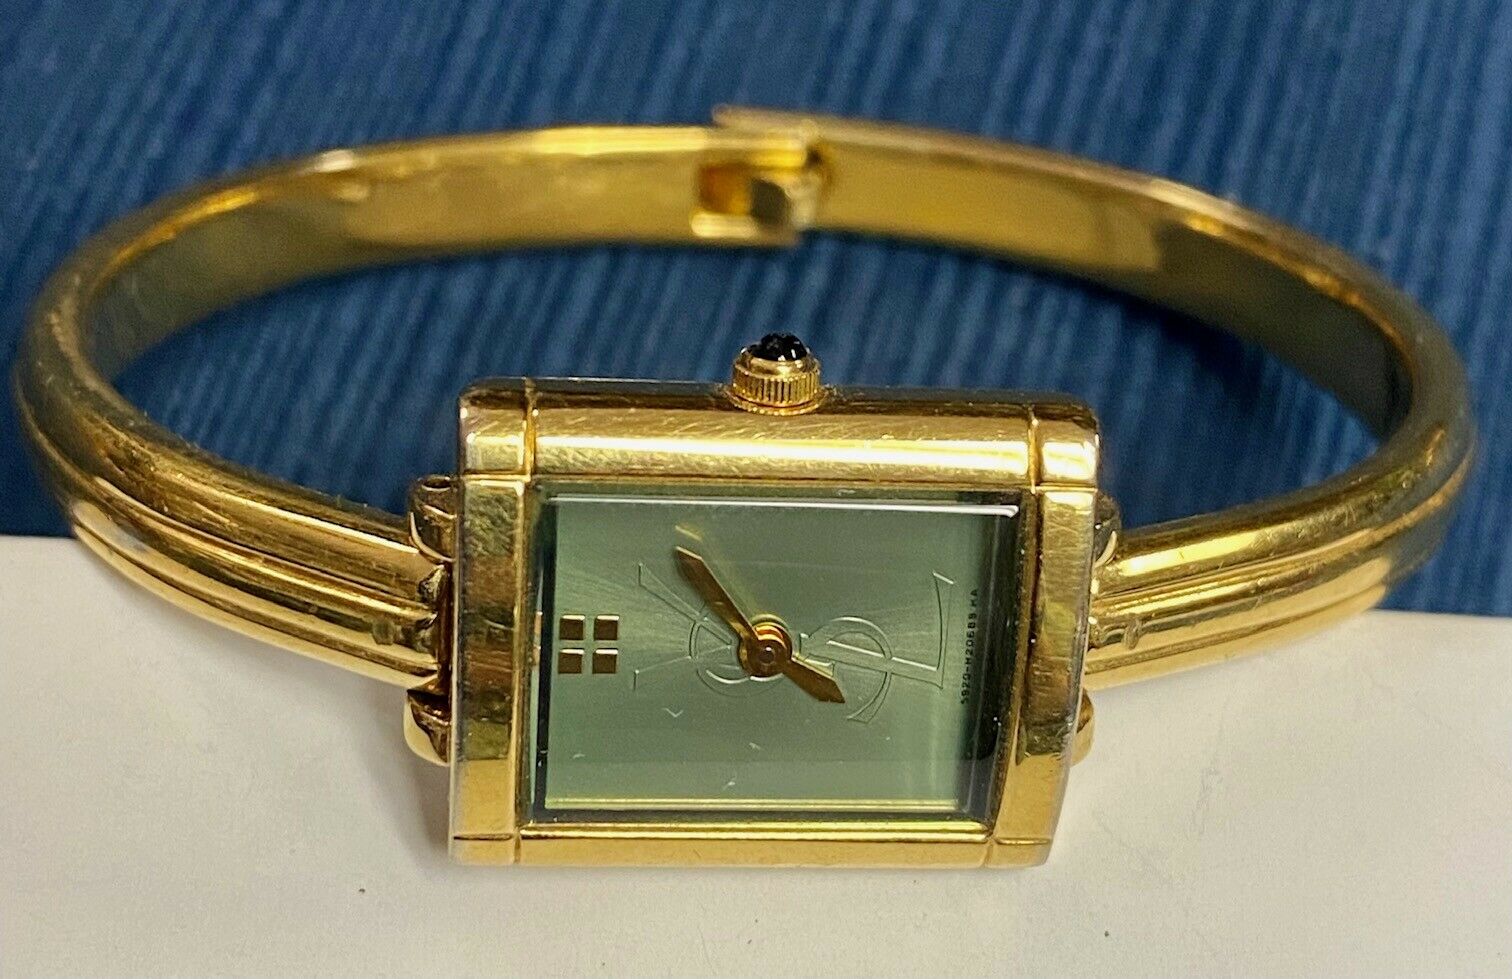 YSL YVES SAINT LAURENT GOLD PLATED SWISS MADE WATCH | eBay